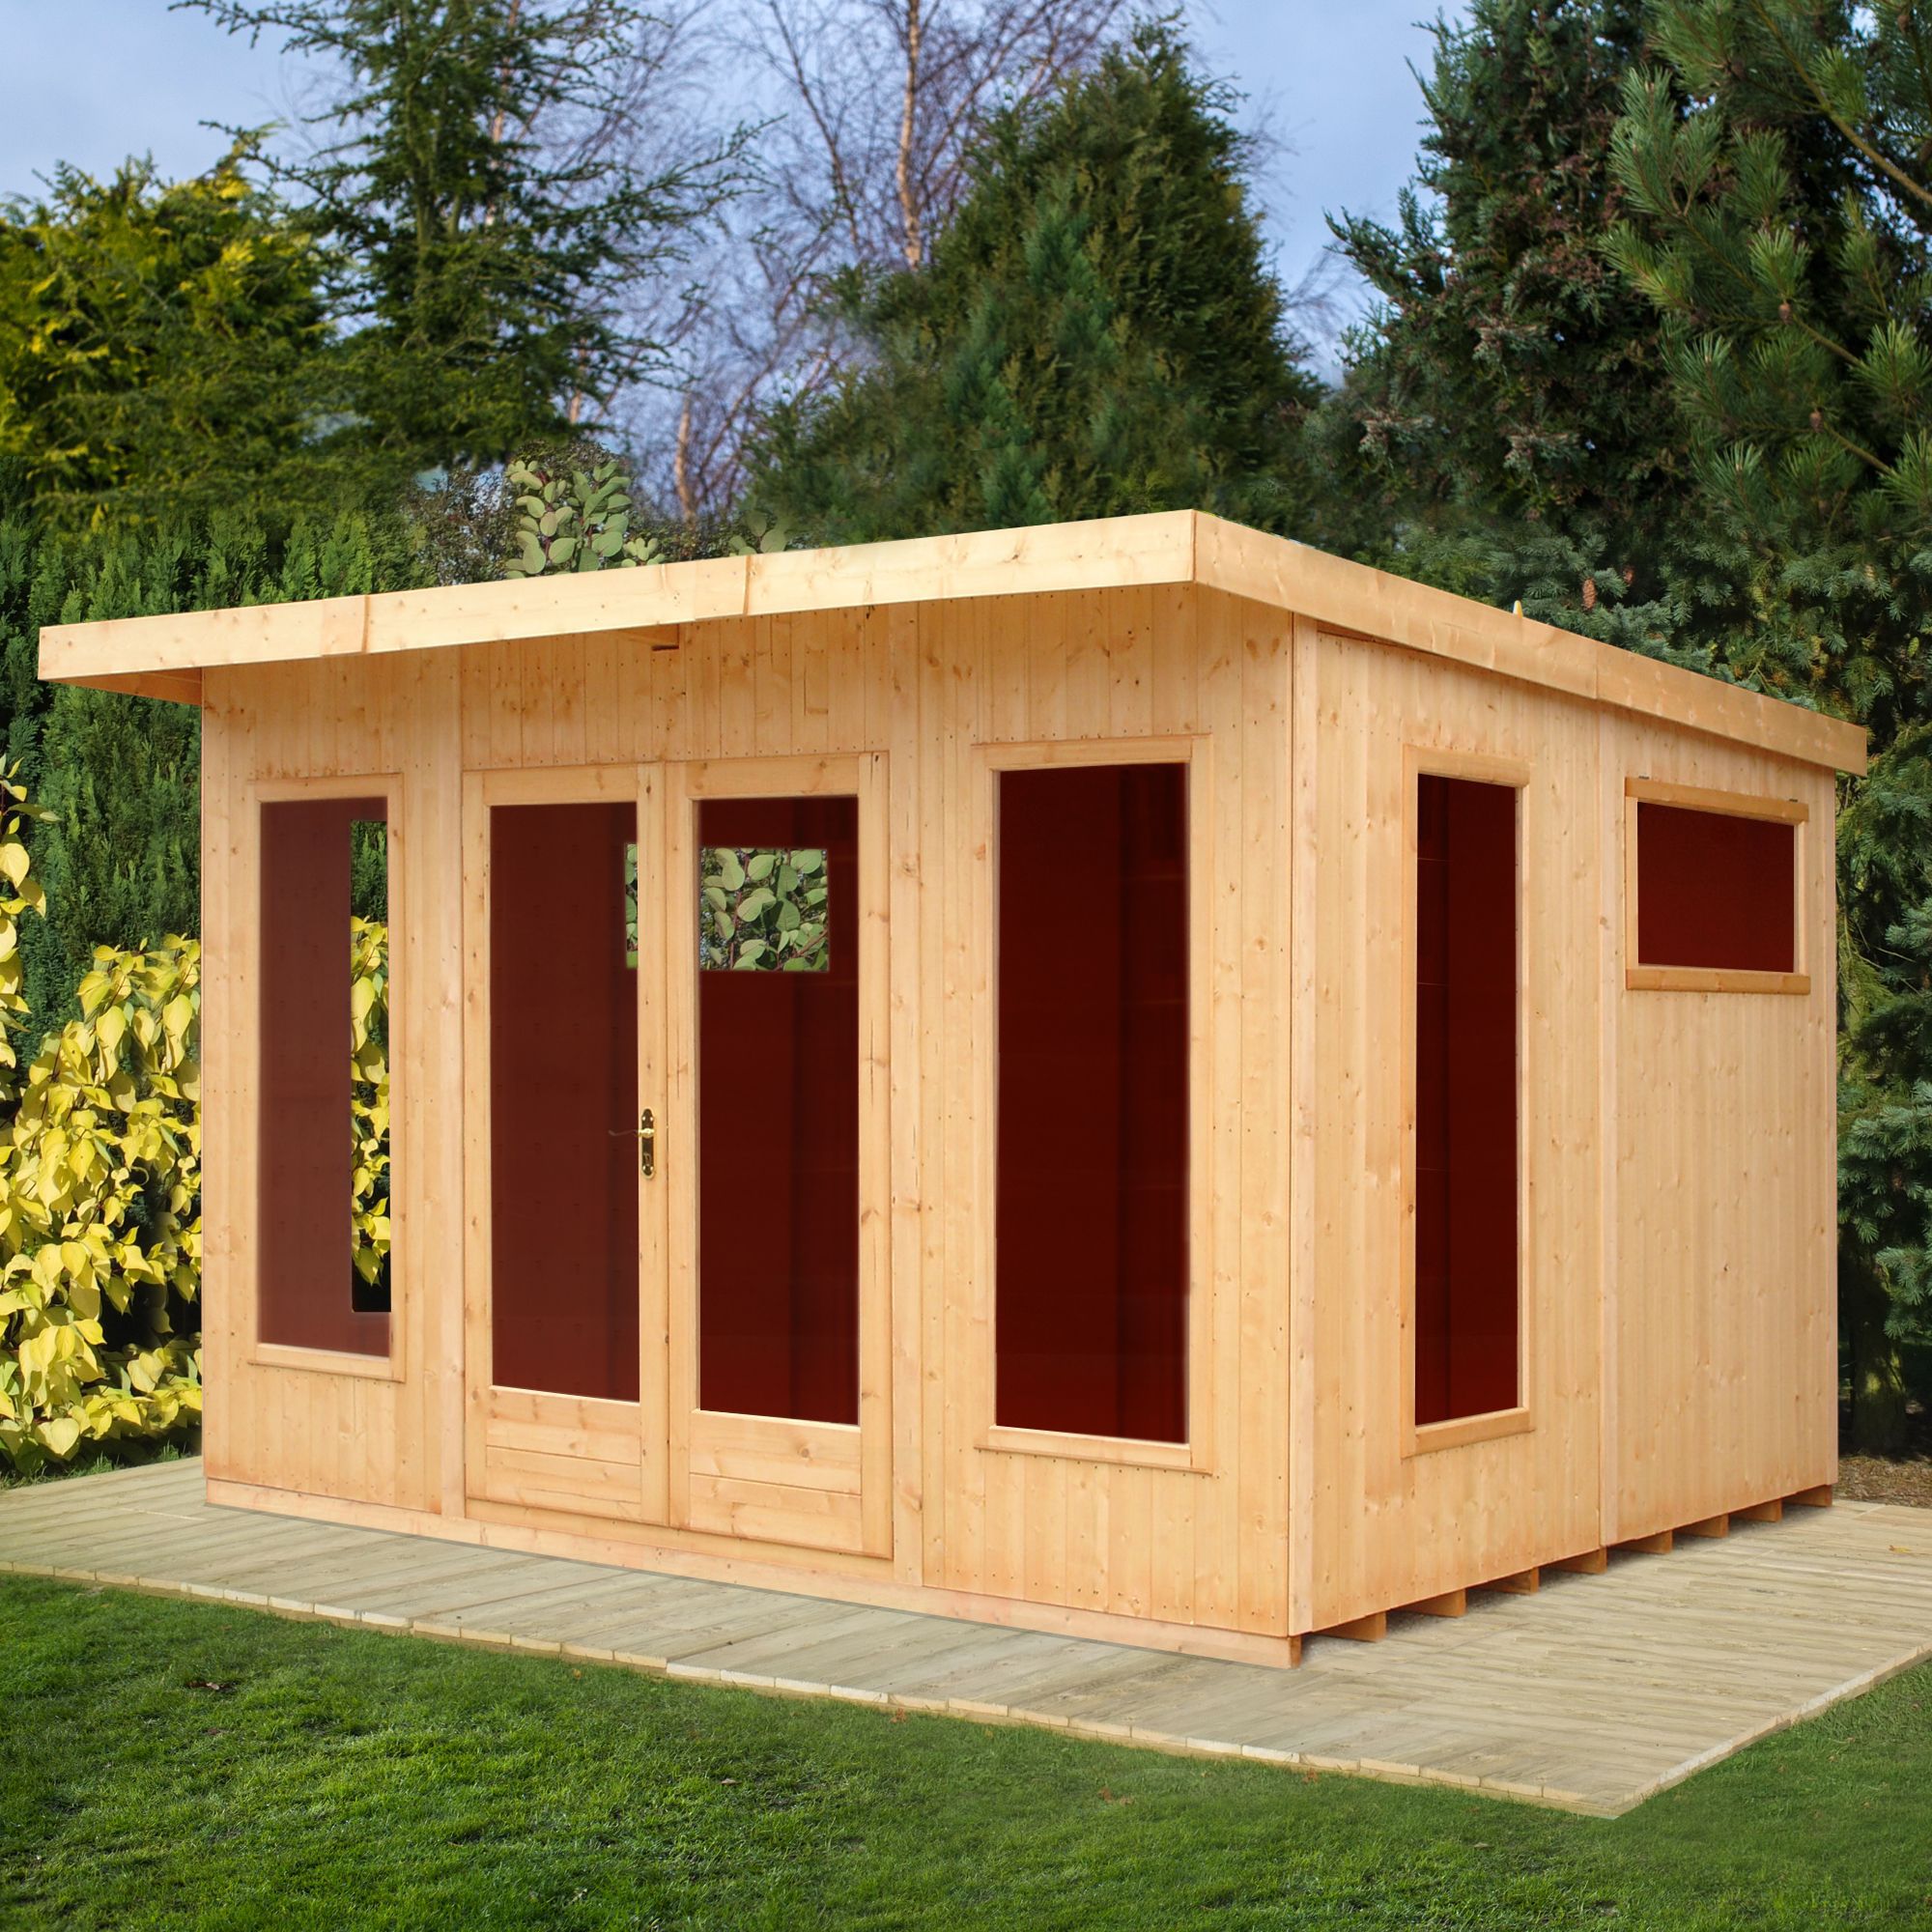 12x10 pent garden shed - storage shed